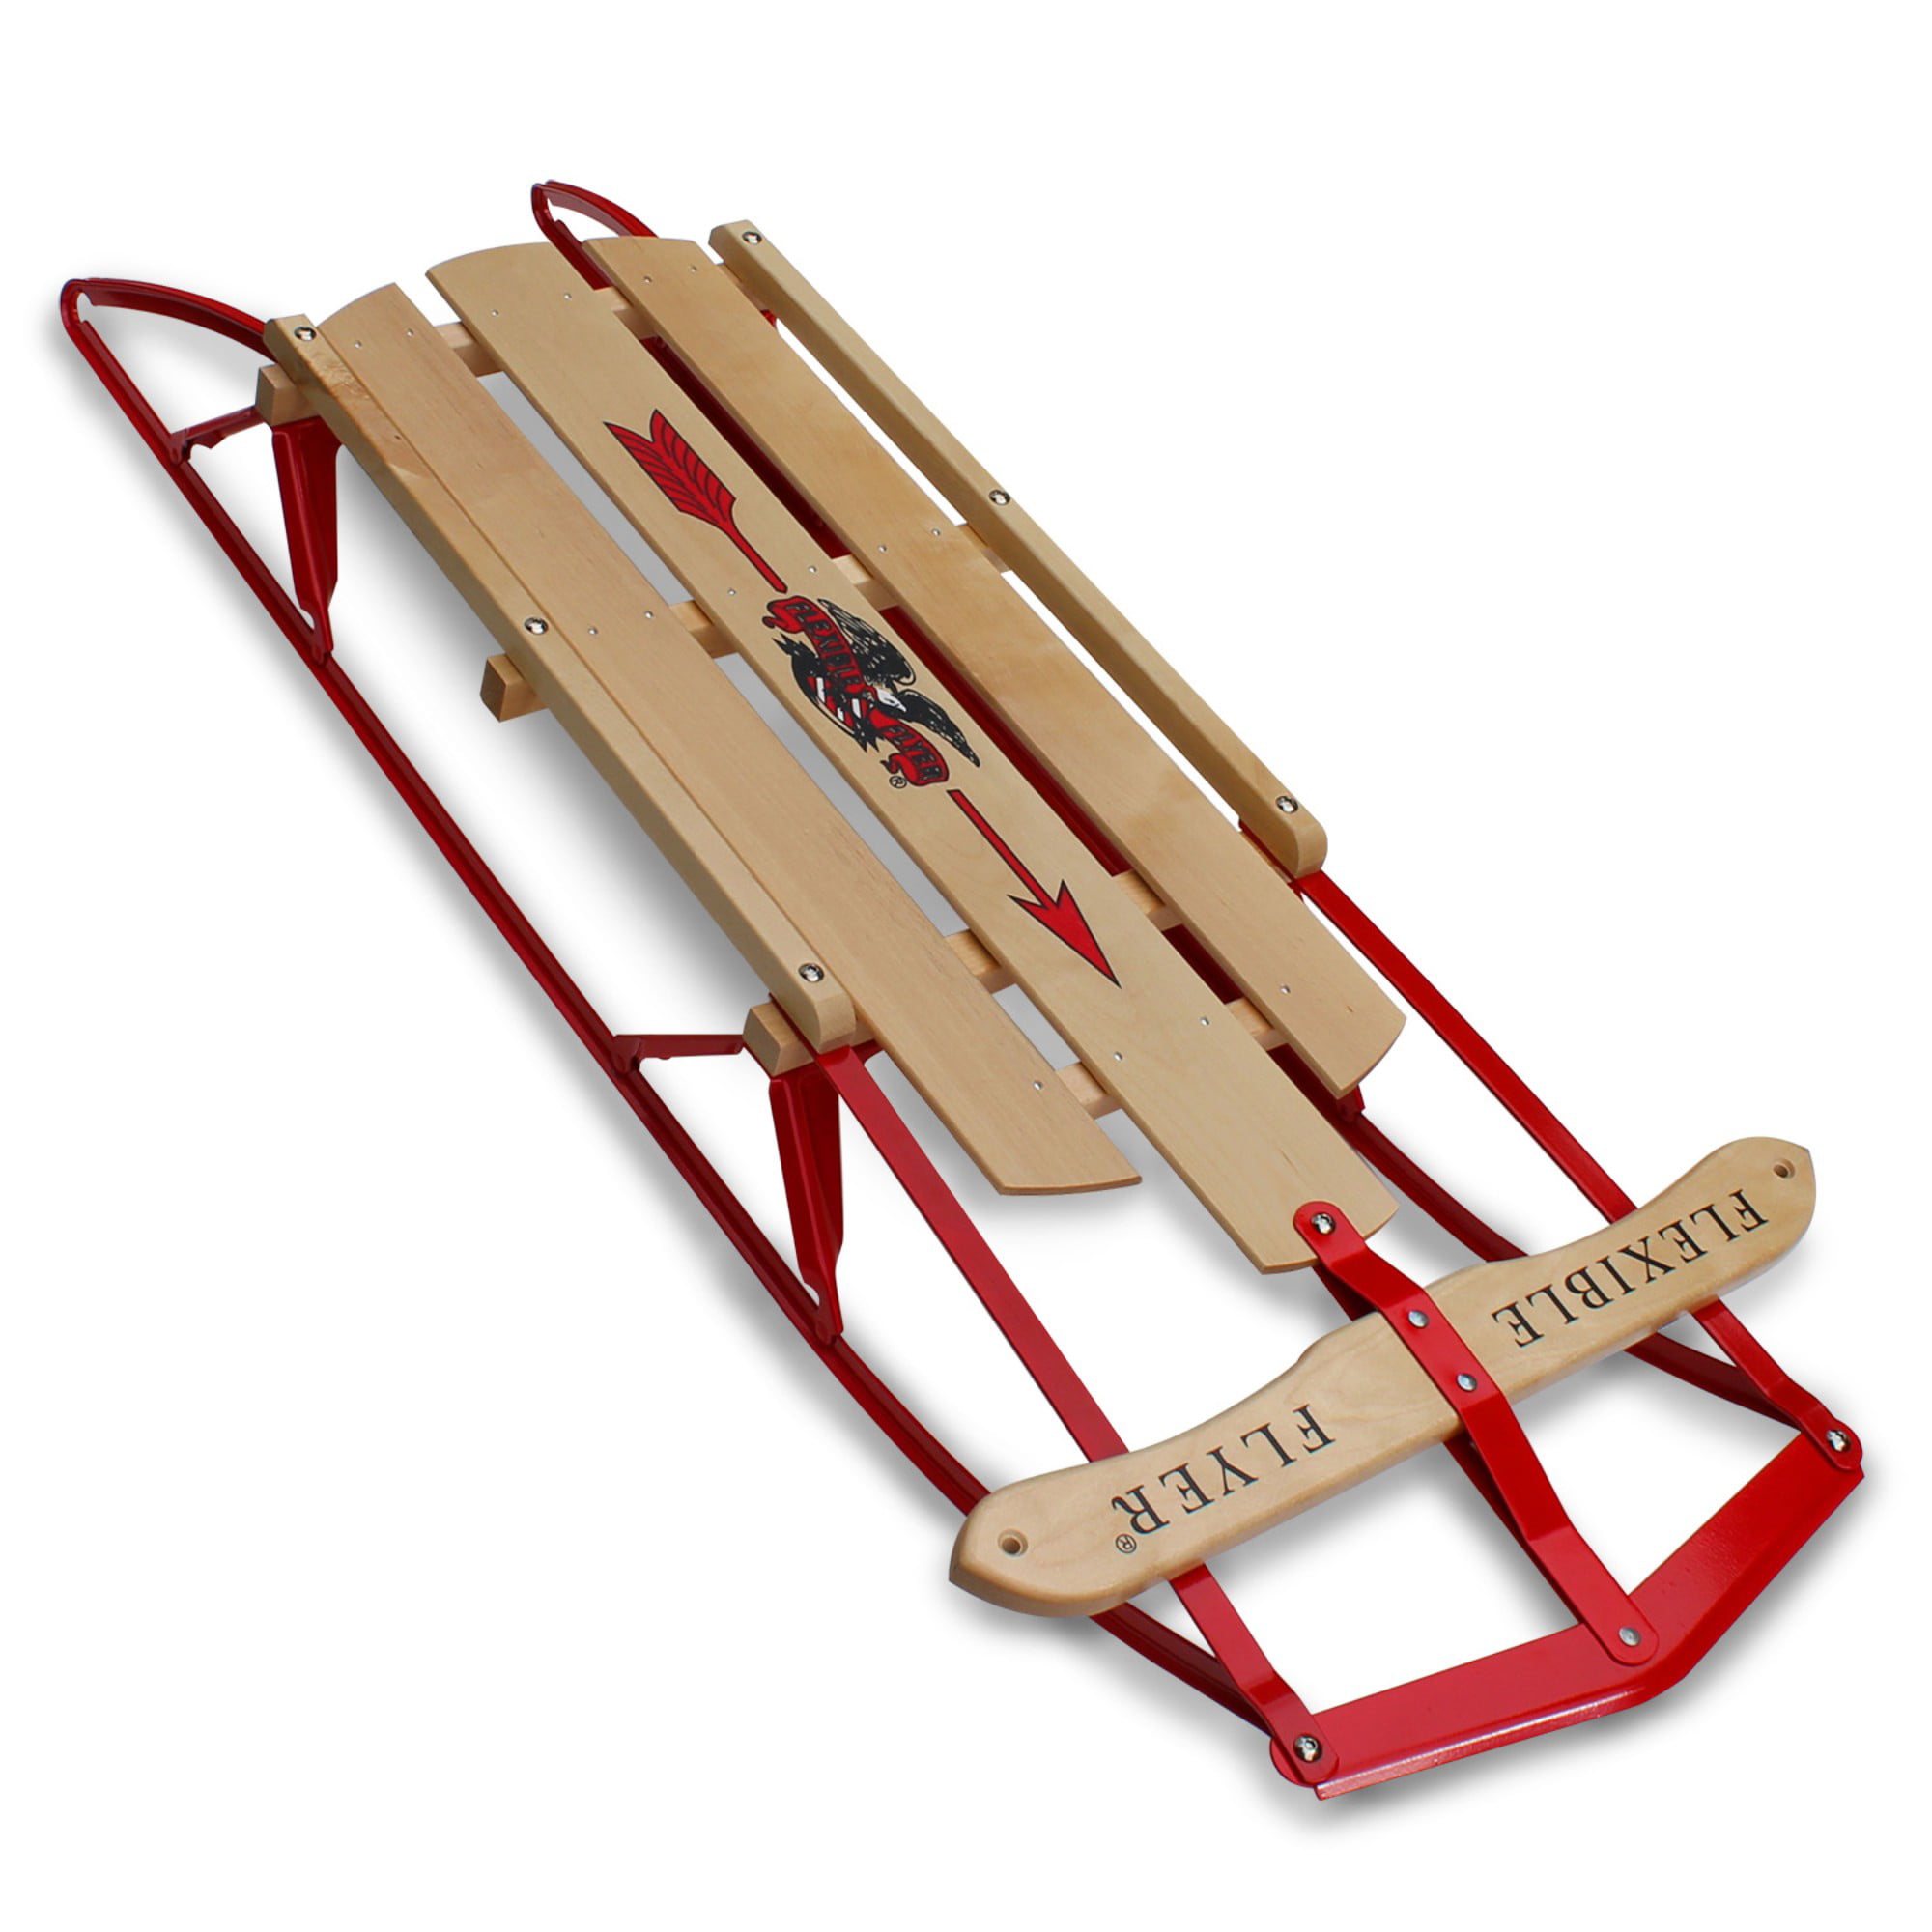 Paricon Flexible Flyer Wooden Baby Sleigh B40 for sale online 